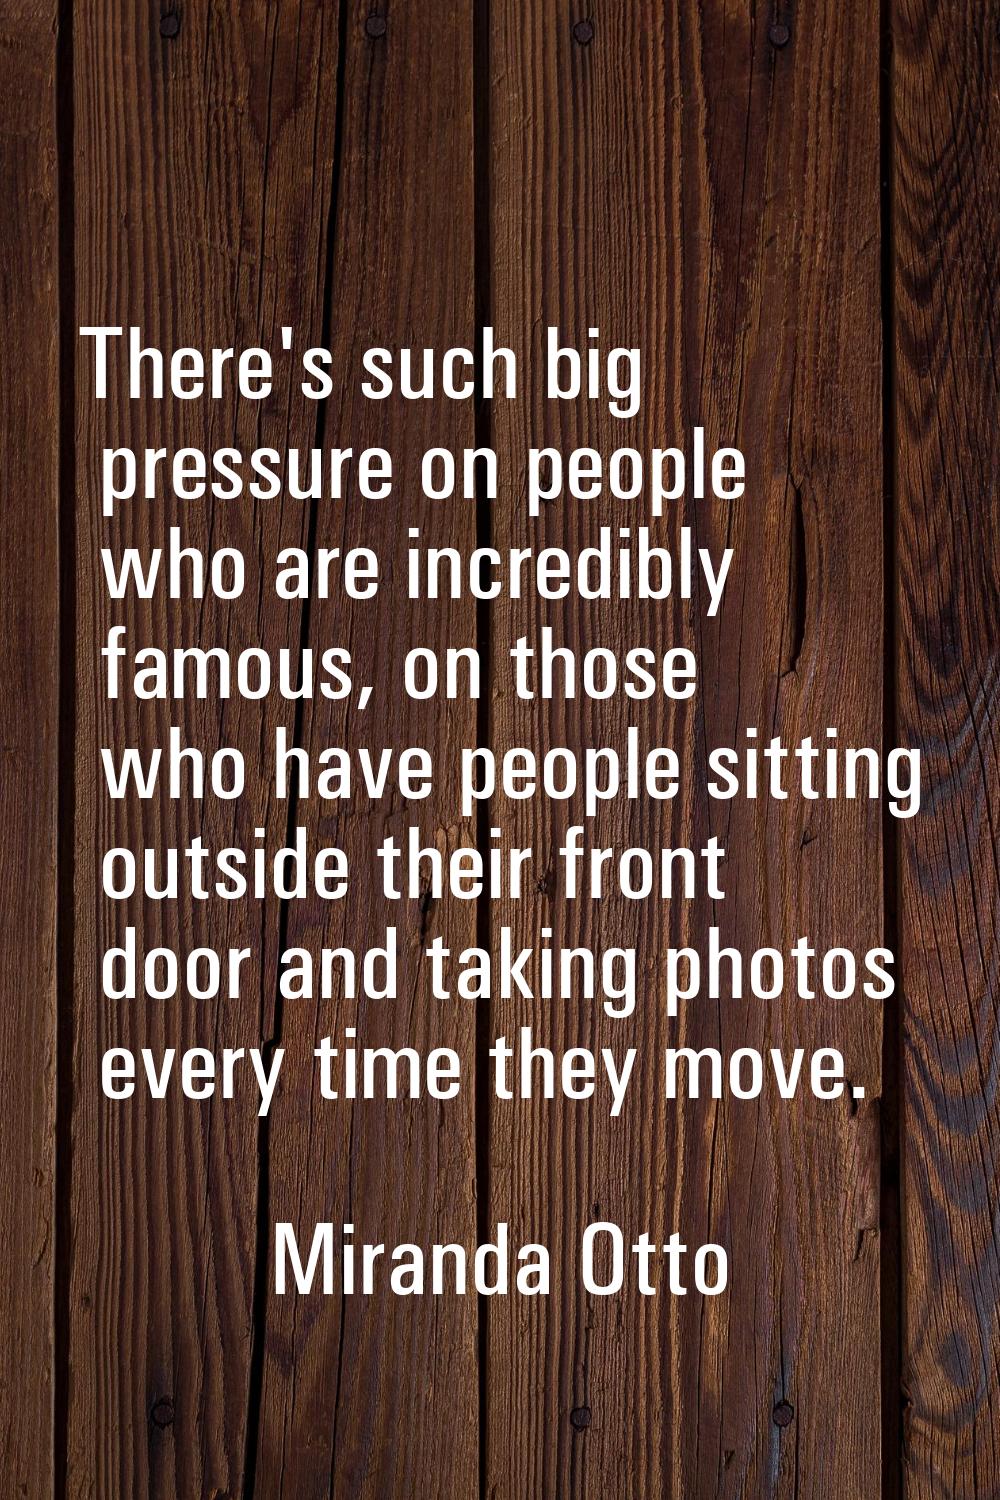 There's such big pressure on people who are incredibly famous, on those who have people sitting out